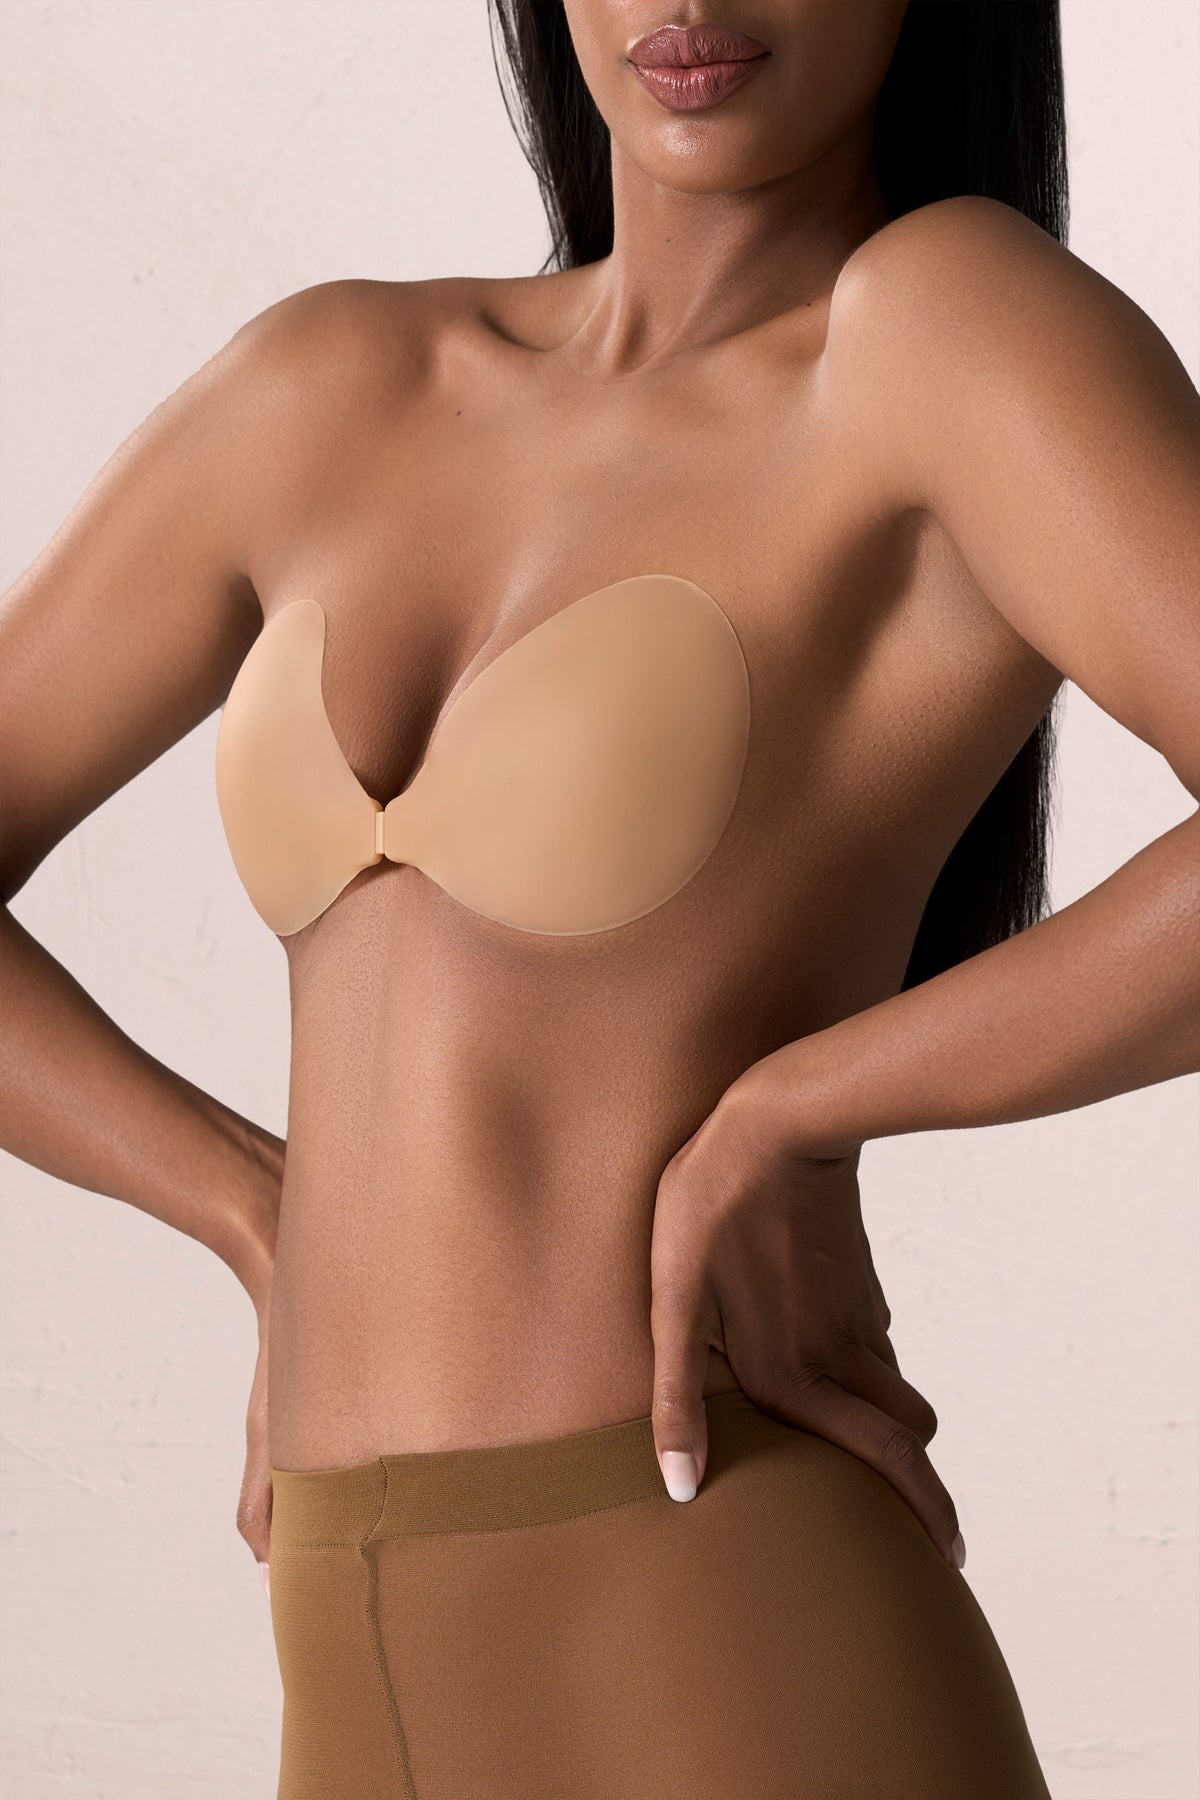 Strapless Bras and Boob Tape For Summer - Brit + Co